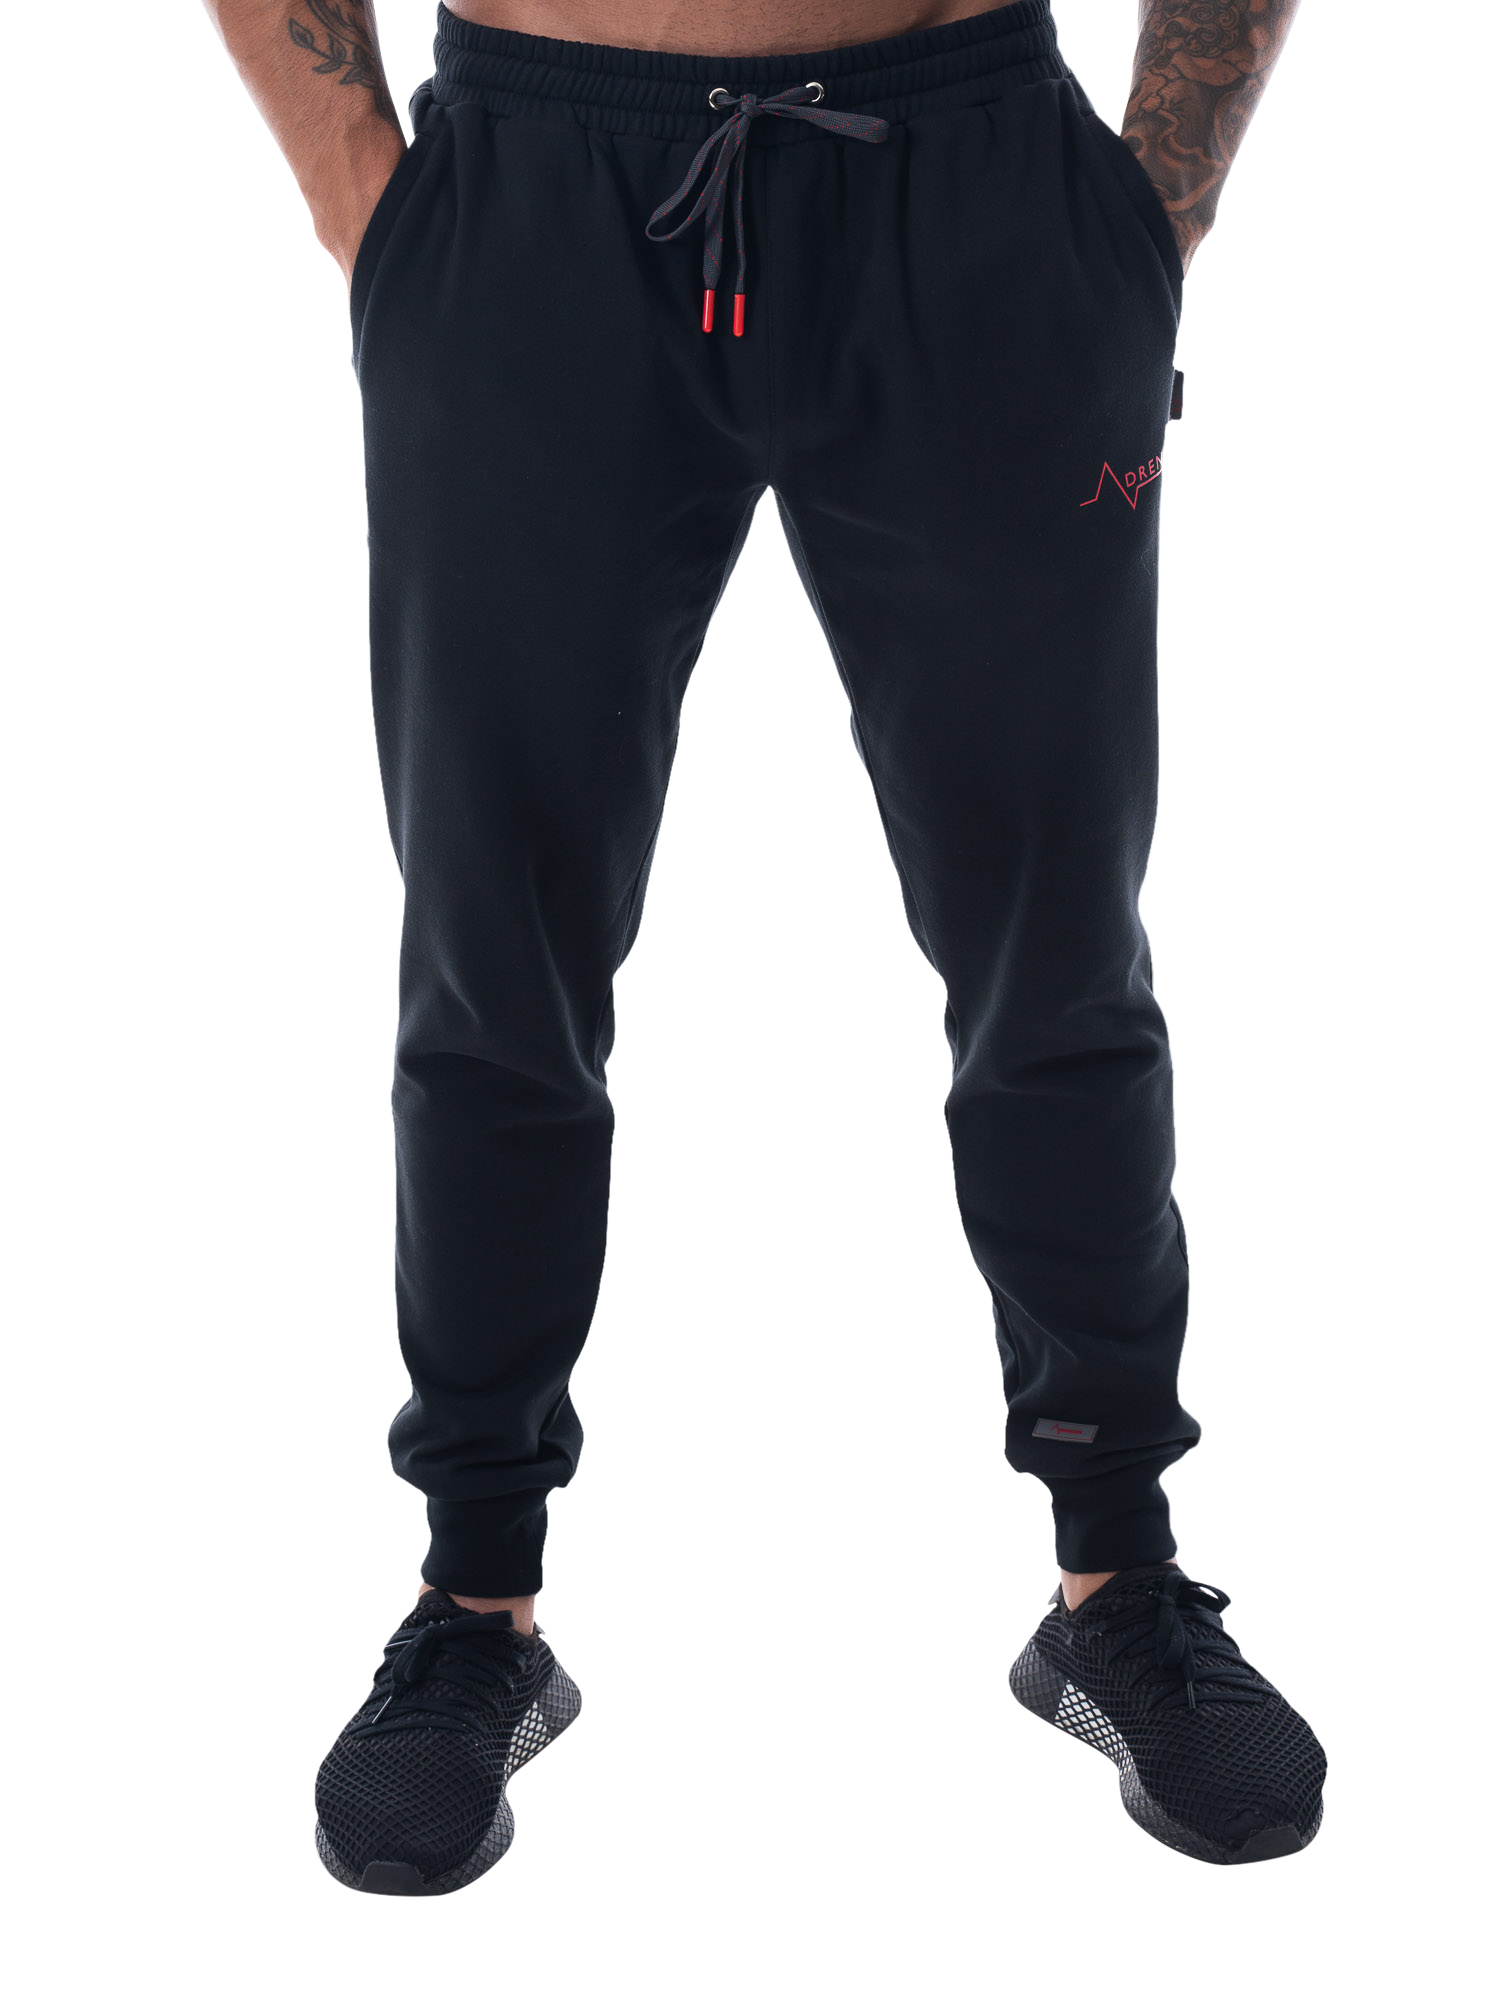 Mens Black Joggers | We Are Adrenaline | Athleisure Wear